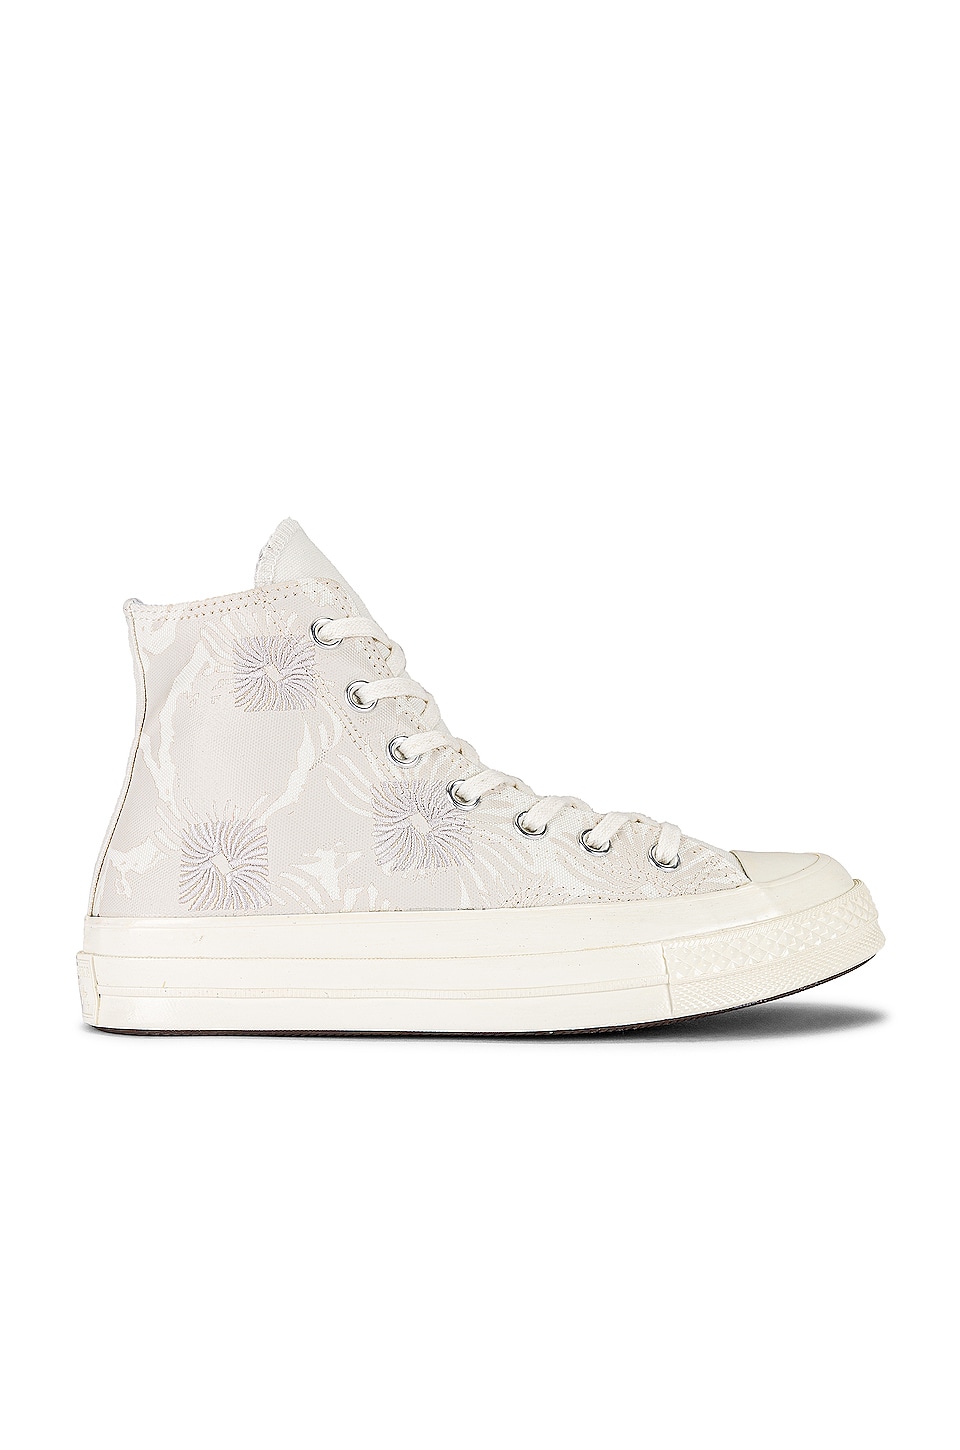 barr emily ghosted Кроссовки Converse Chuck 70 Graphic, цвет Egret, Ghosted, & Pale Putty